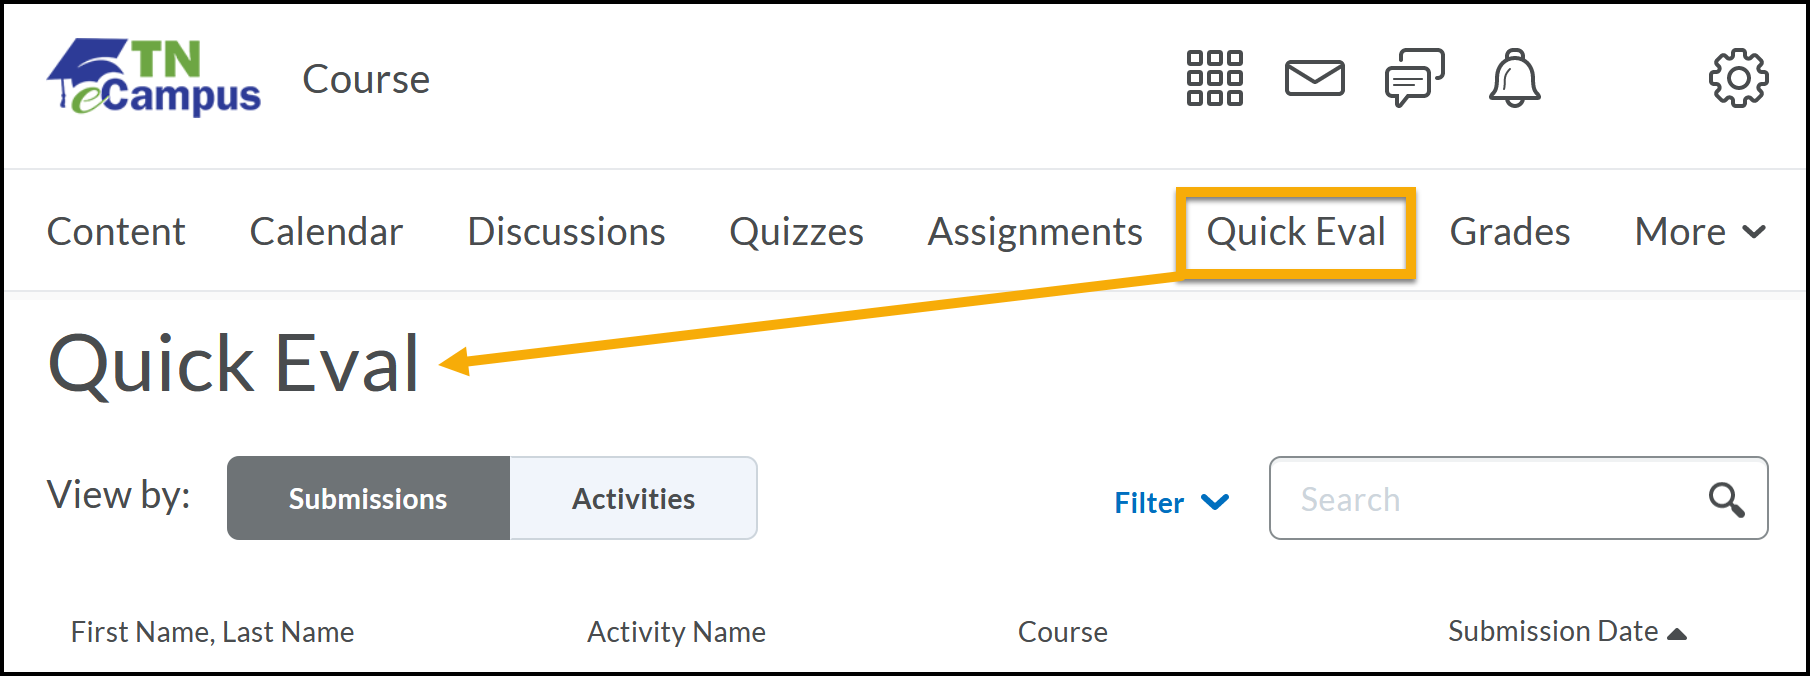 Triple period/menu icon highlighted expanding Dismissed activities in the Quick Eval window.